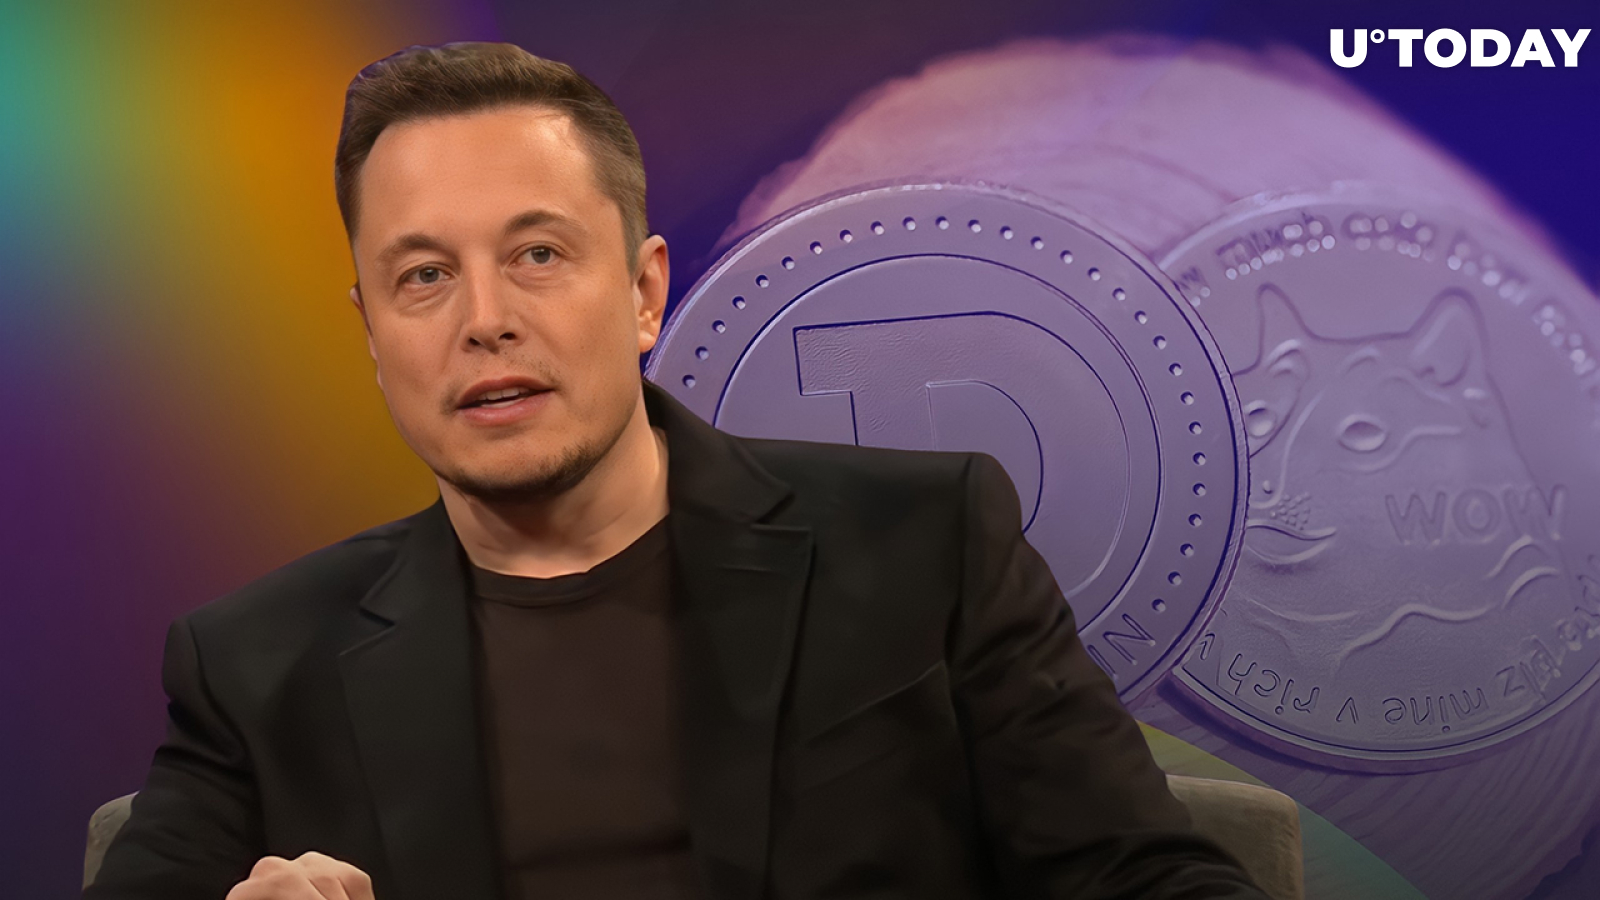 Elon Musk Is Showing Support for Decentralized Web on Dogecoin